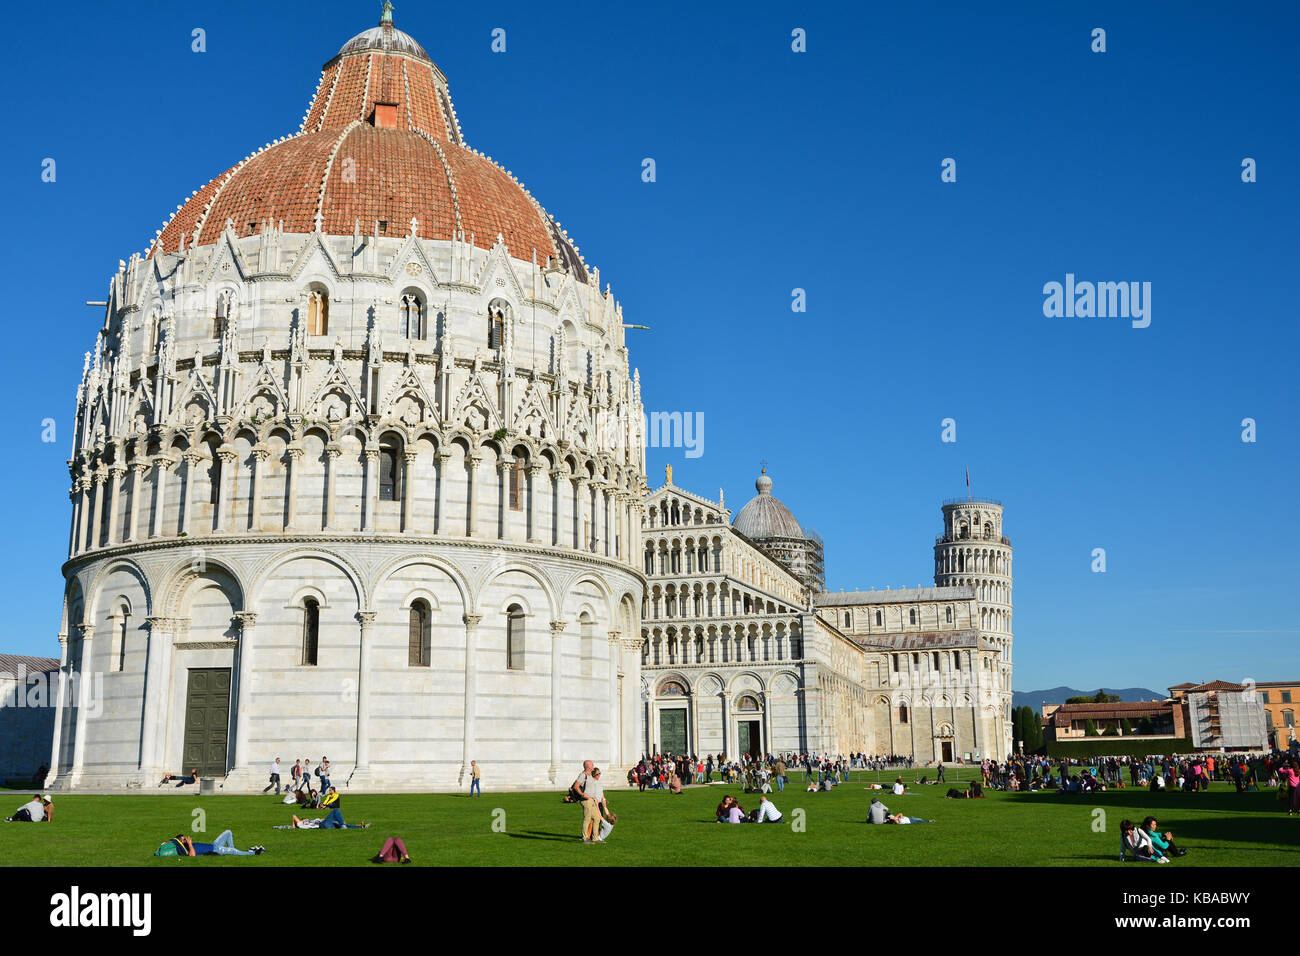 Pisa Baptistery of St. John in the foreground with the Leaning Tower of Pisa in the background at the Piazza dei Miracoli, Pisa, Italy Stock Photo